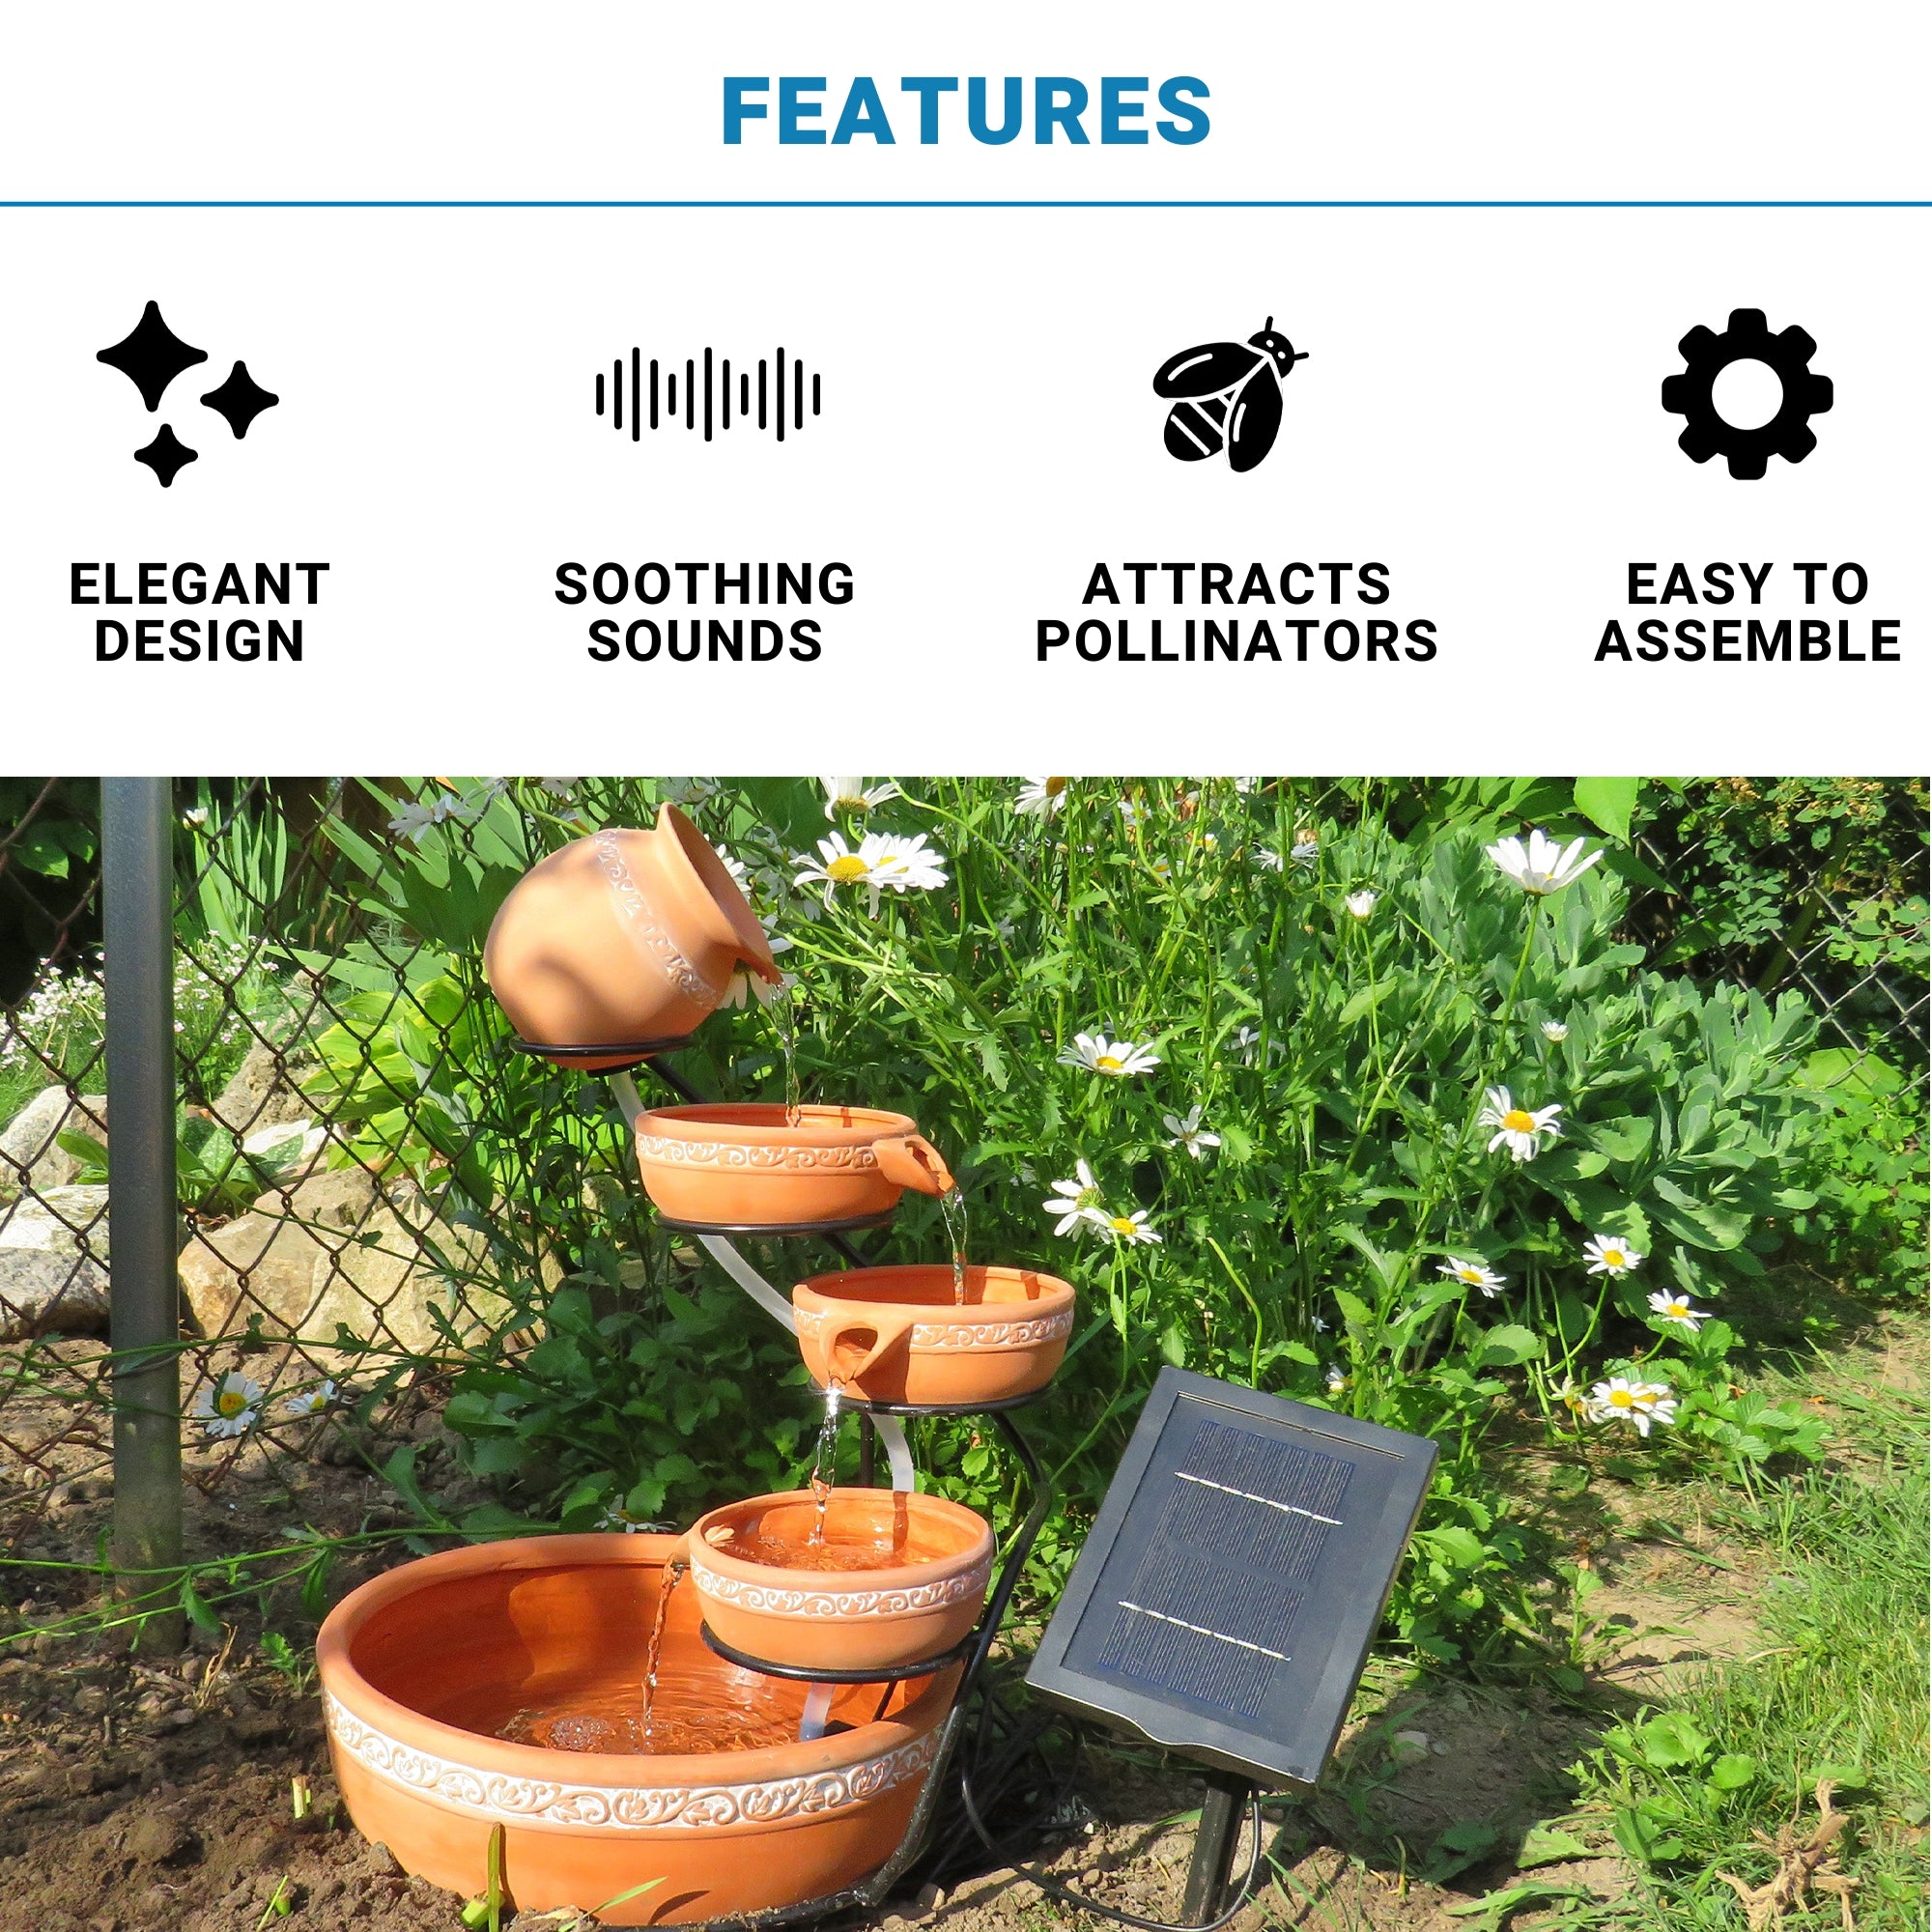 Koolscapes solar powered 5-tier cascading fountain and solar panel set up on green grass with a garden plot behind. Text and icons above list the features: Elegant design; soothing sounds; attracts pollinators; easy to assemble